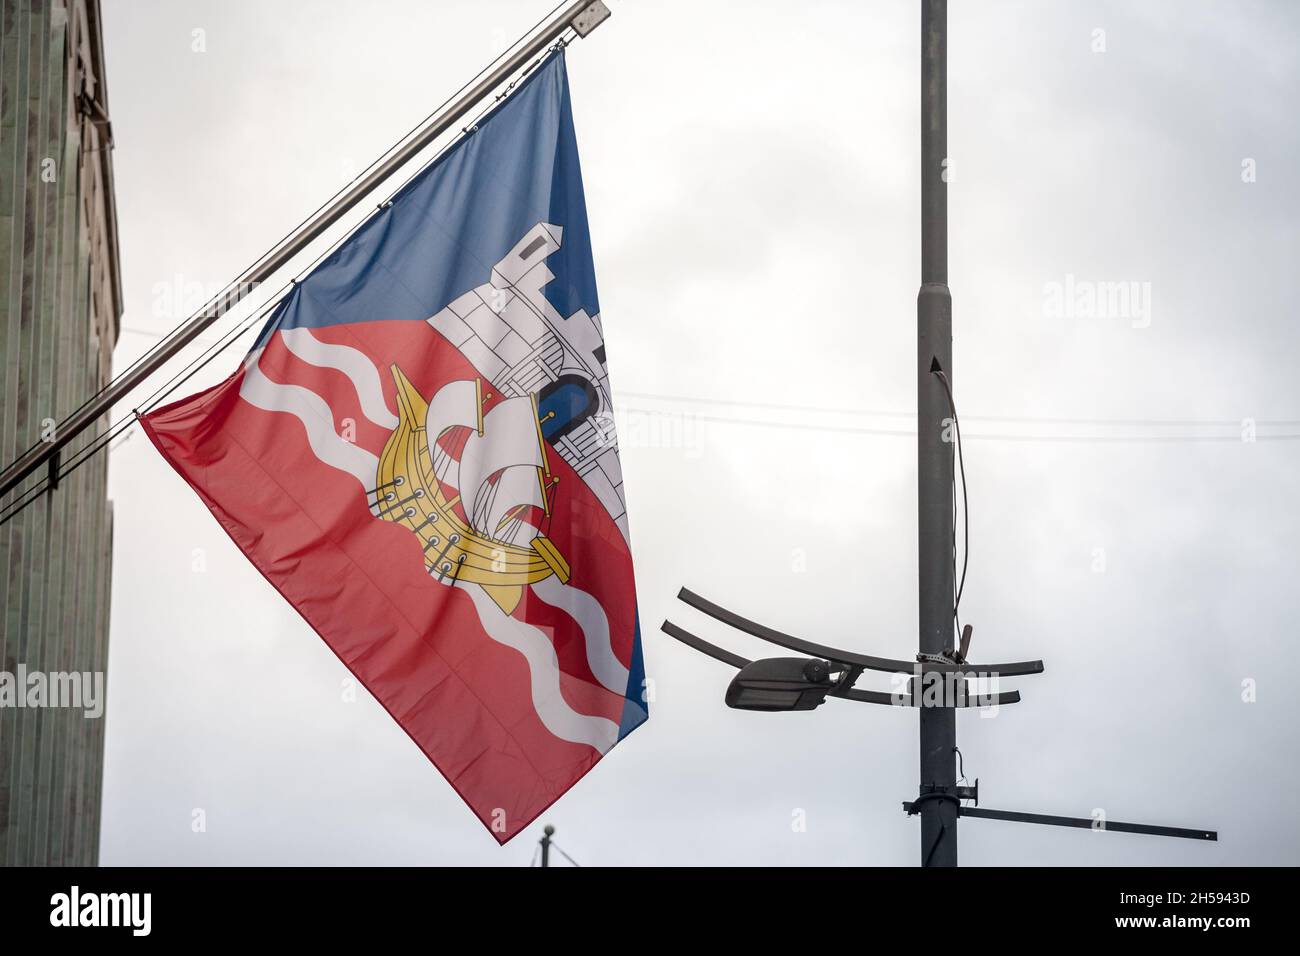 Picture of the Belgrade coat of arms on their official flag. Belgrade is the capital of the southeast European country of Serbia. Stock Photo